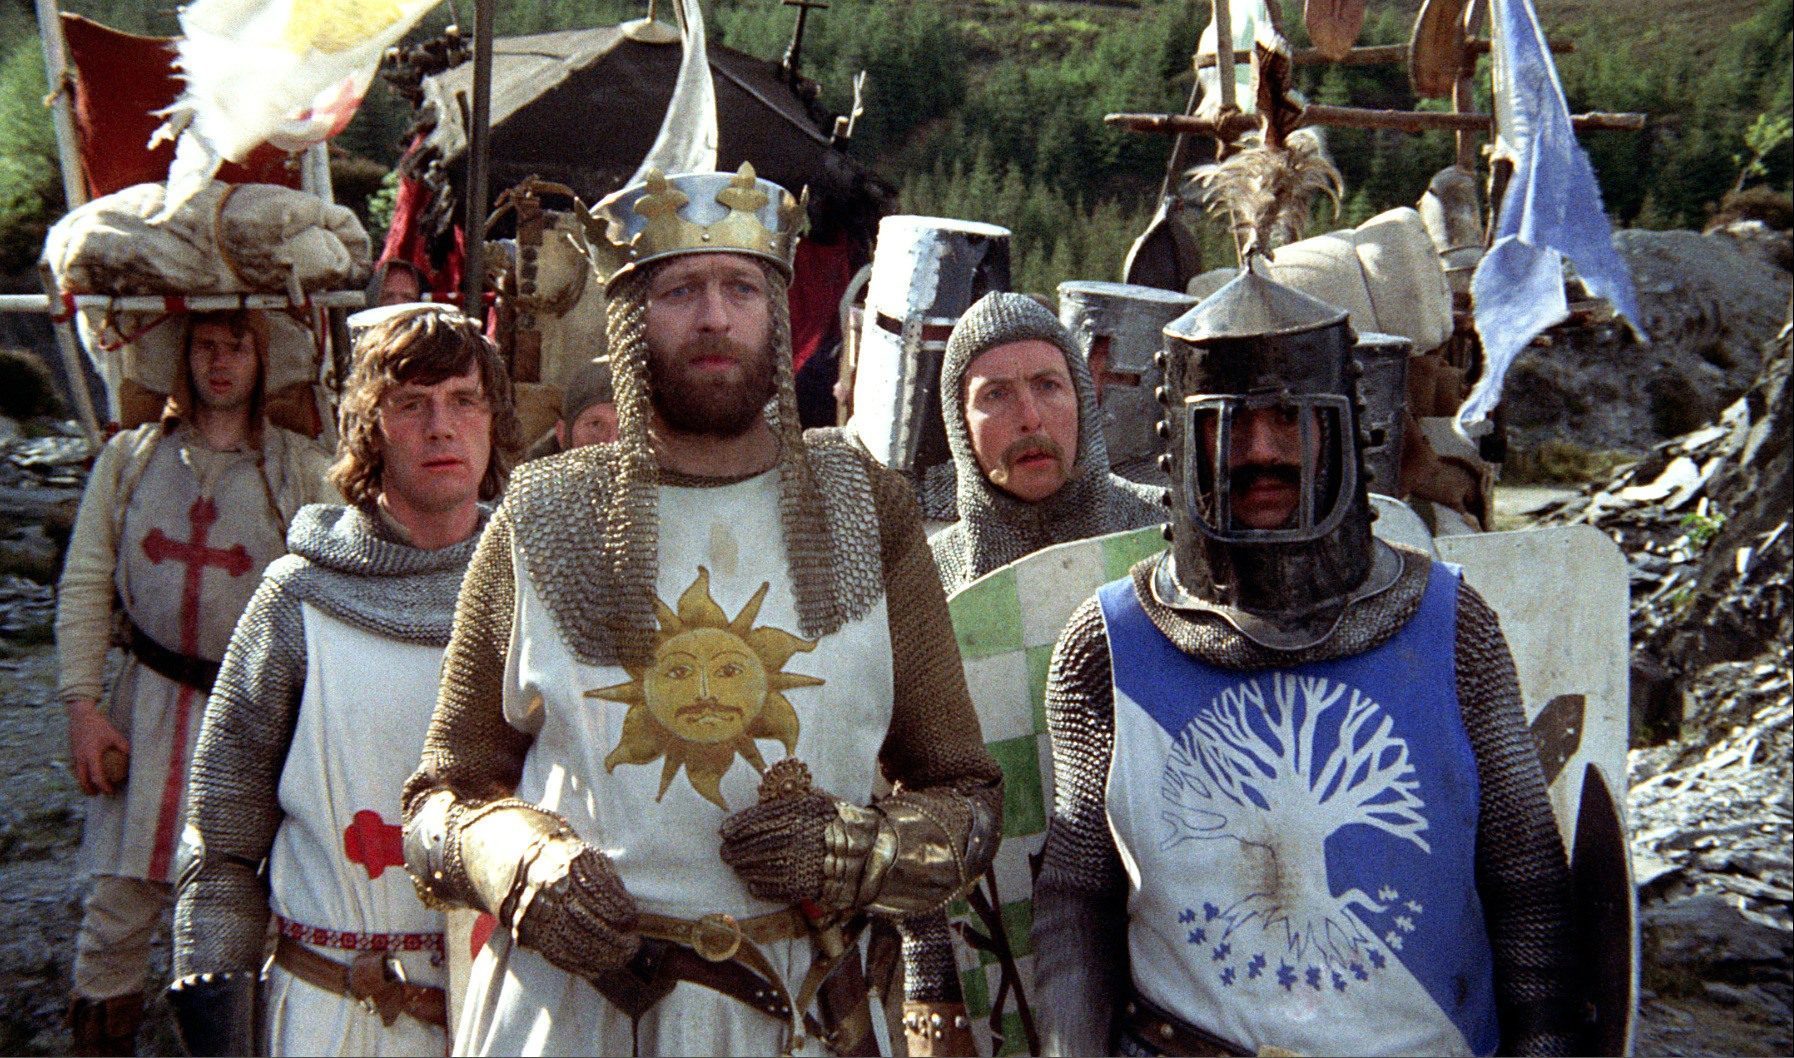 Monty Python and the Holy Grail is more of a cult classic than the show from which it stemmed